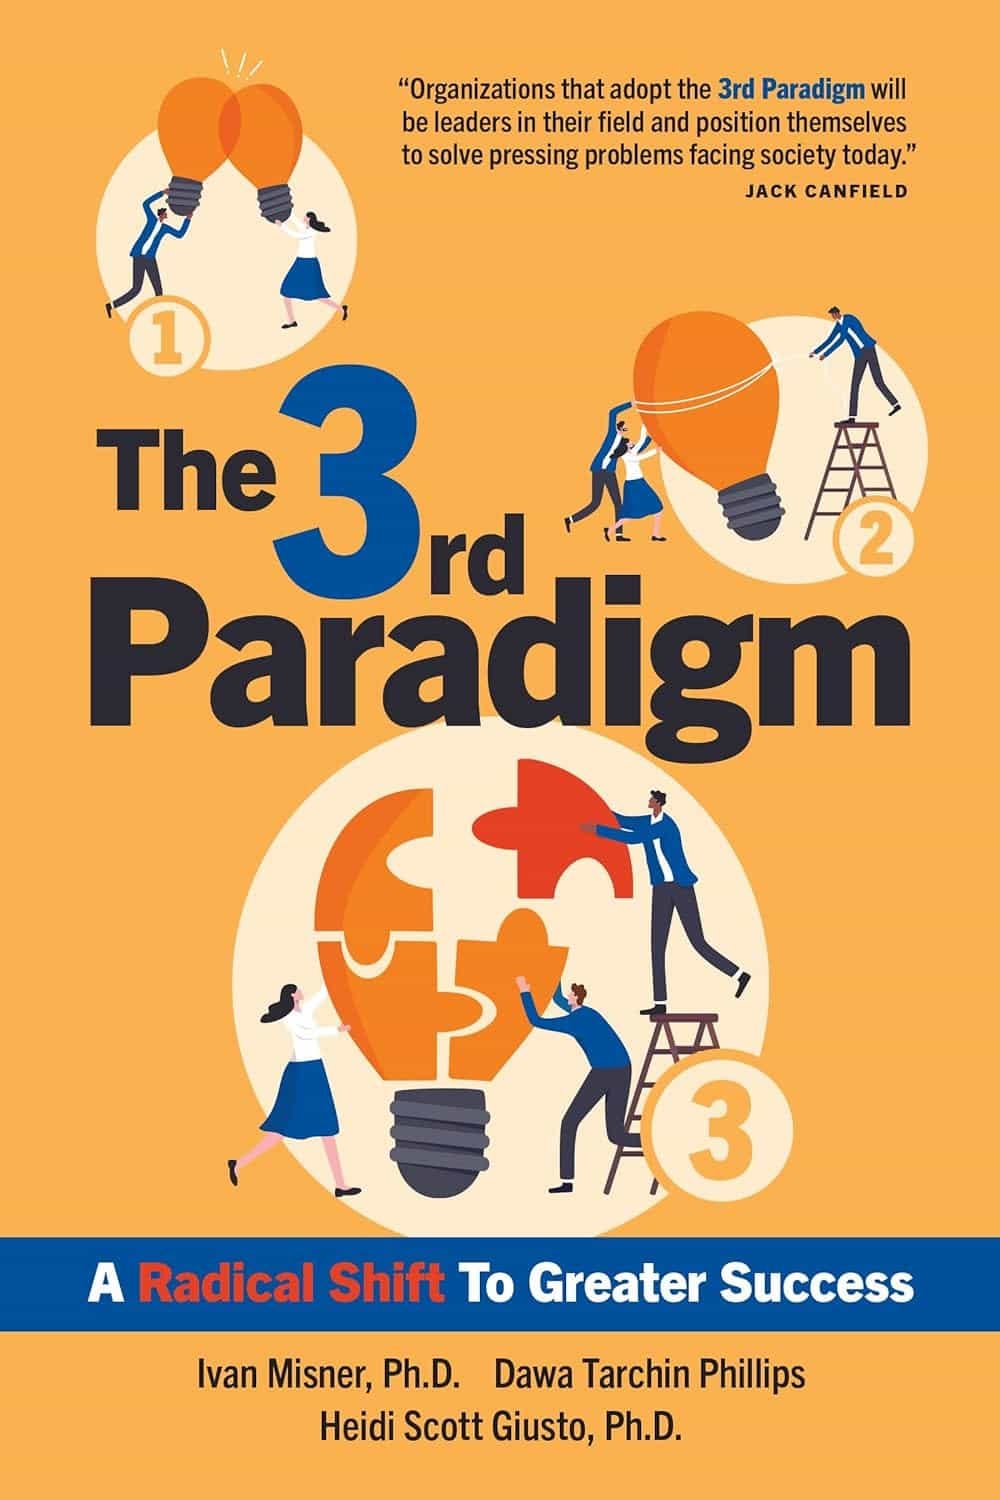 Booke review: The 3rd Paradigm: A Radical Shift to Greater Success.